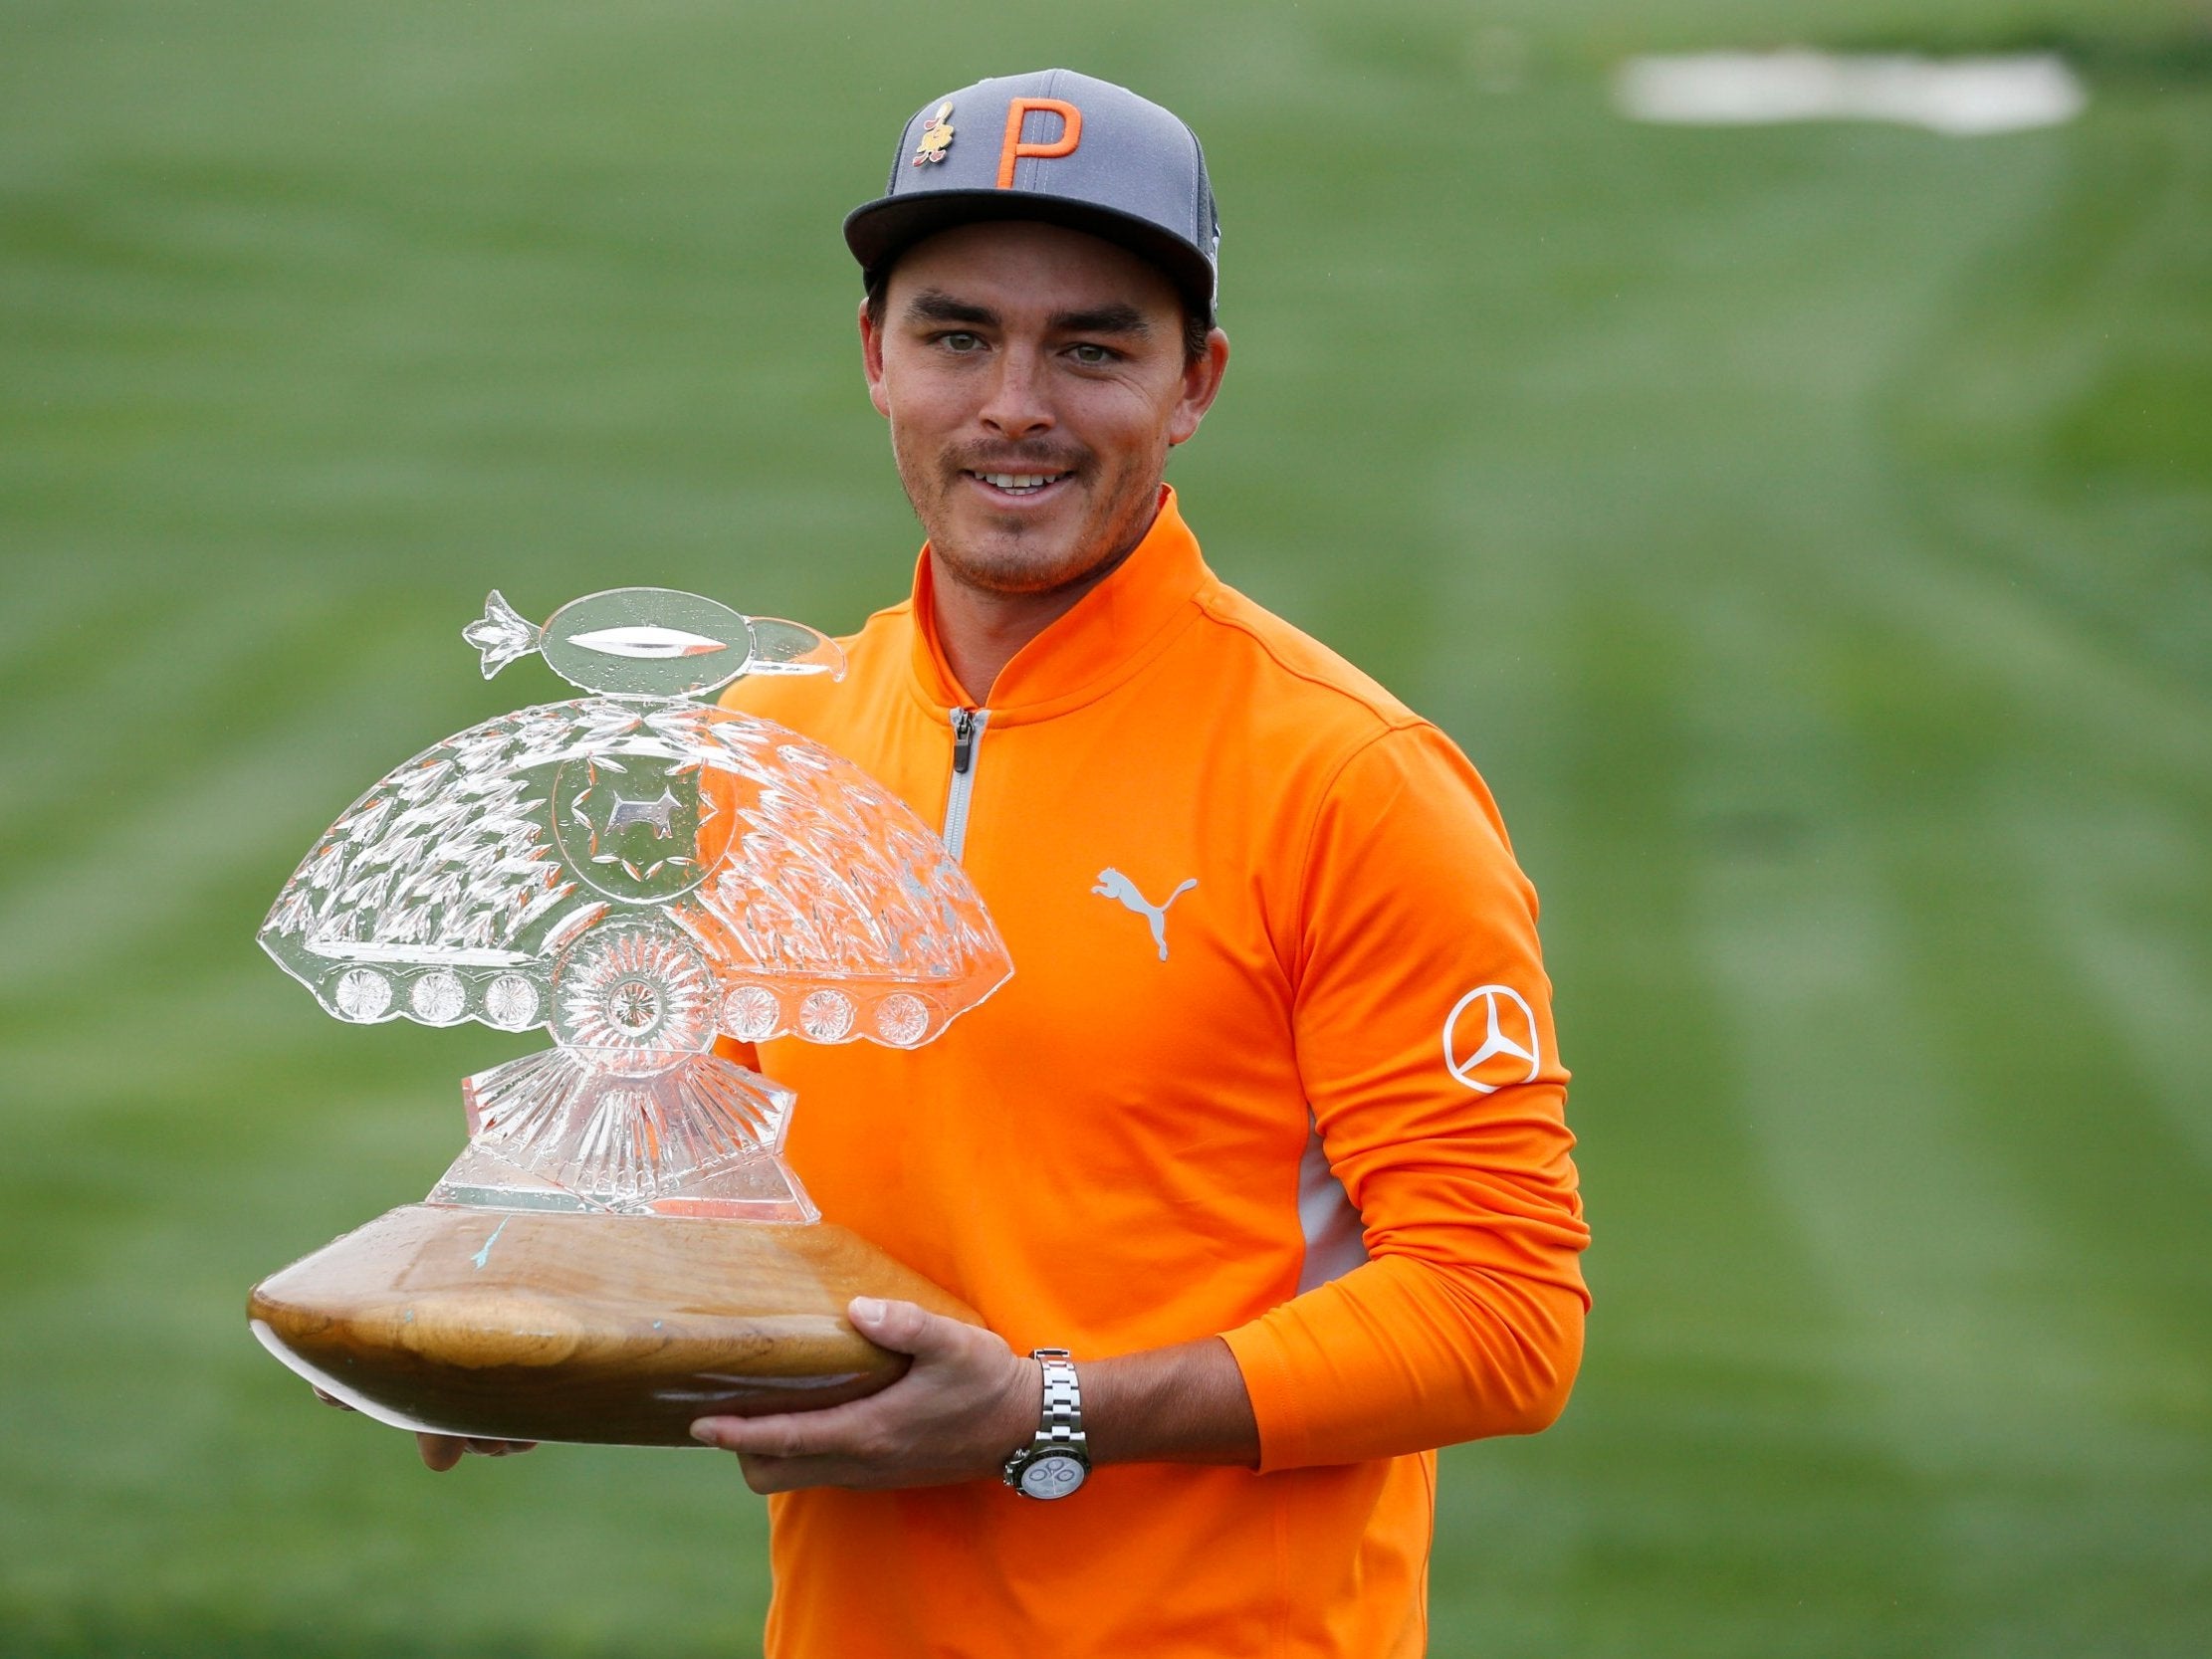 Rickie Fowler won the Phoneix Open despite losing a five-shot lead in one hole